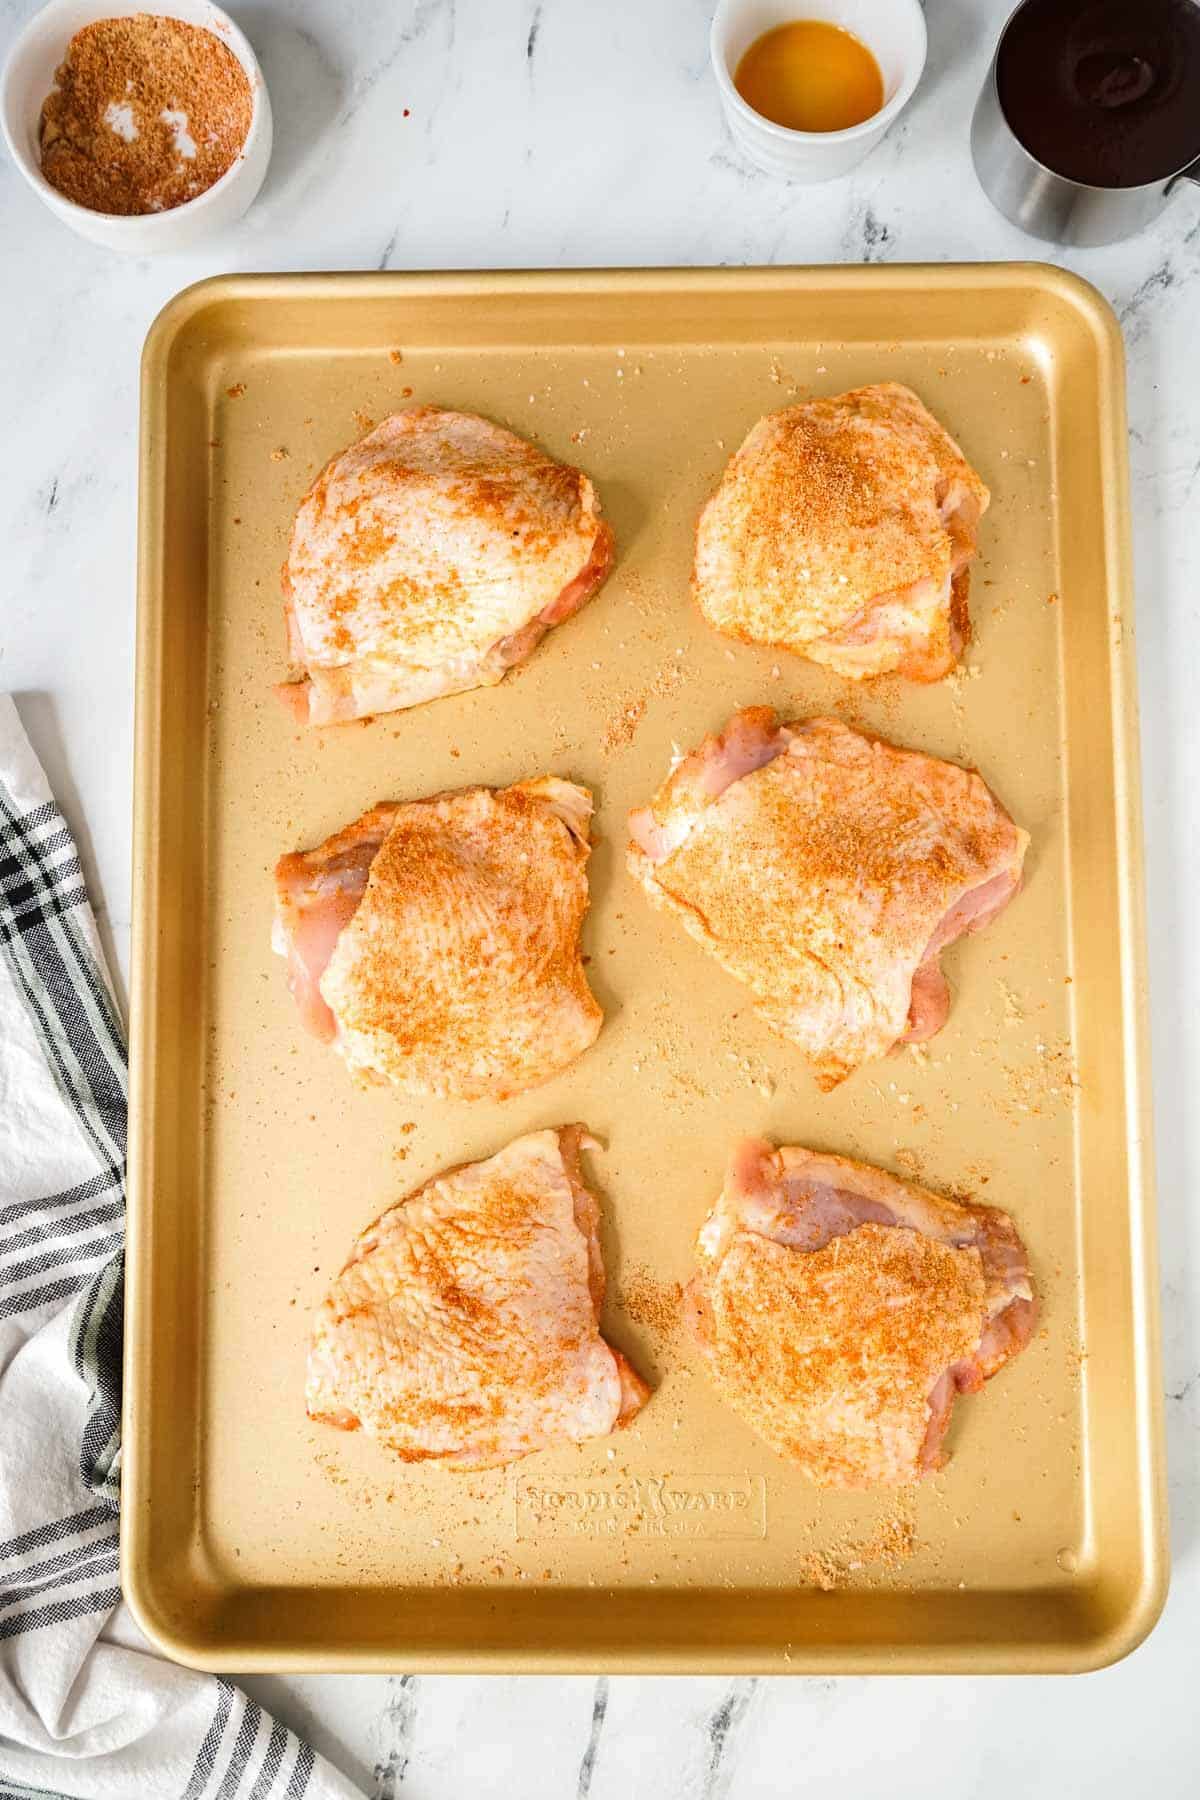 Chicken thighs on a baking sheet coated with a spice rub.